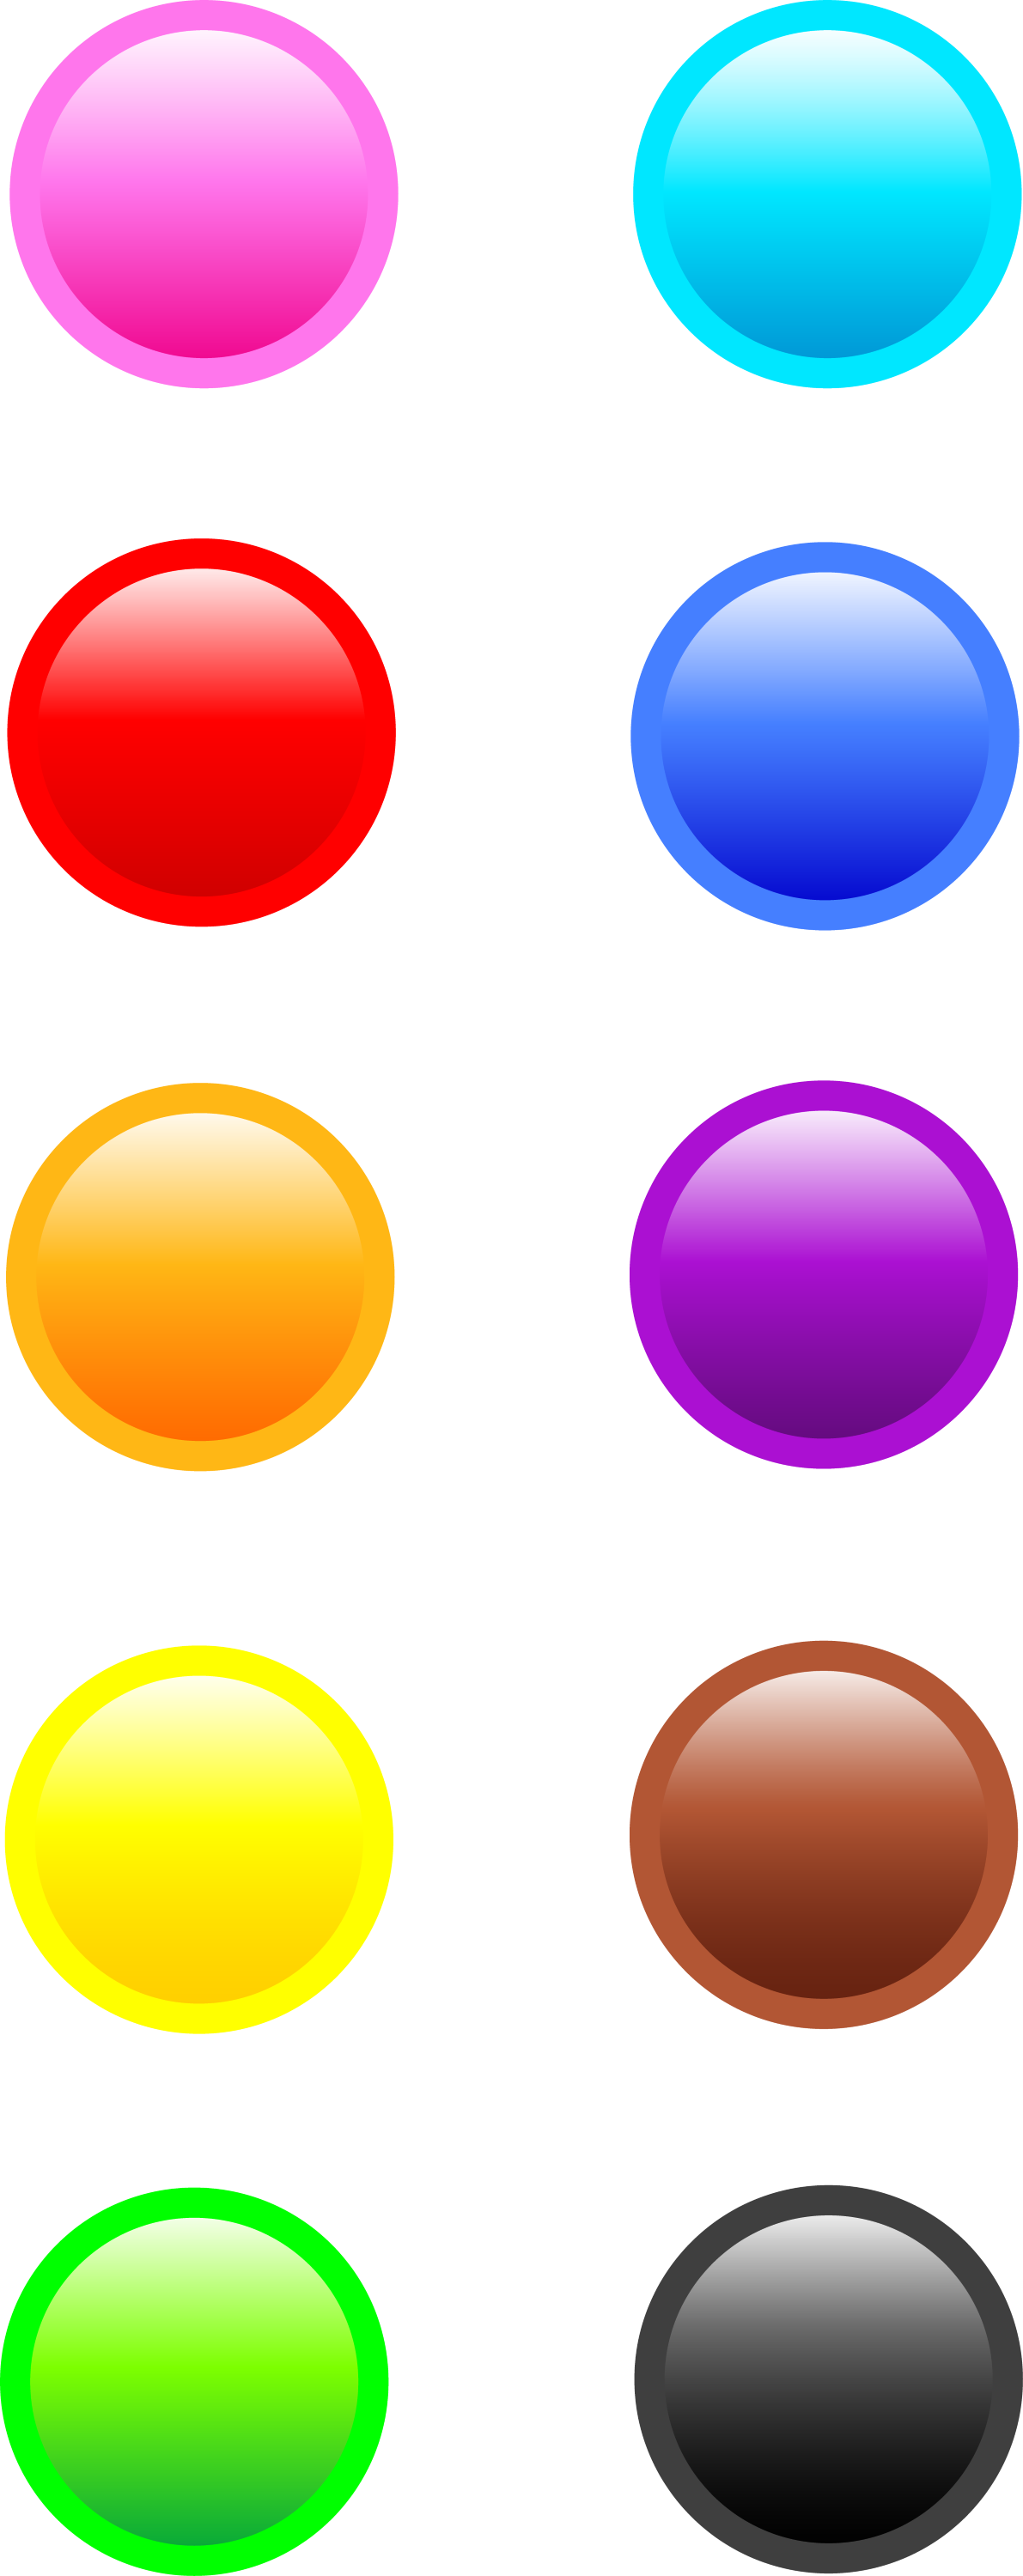 free clip art icons buttons - photo #44